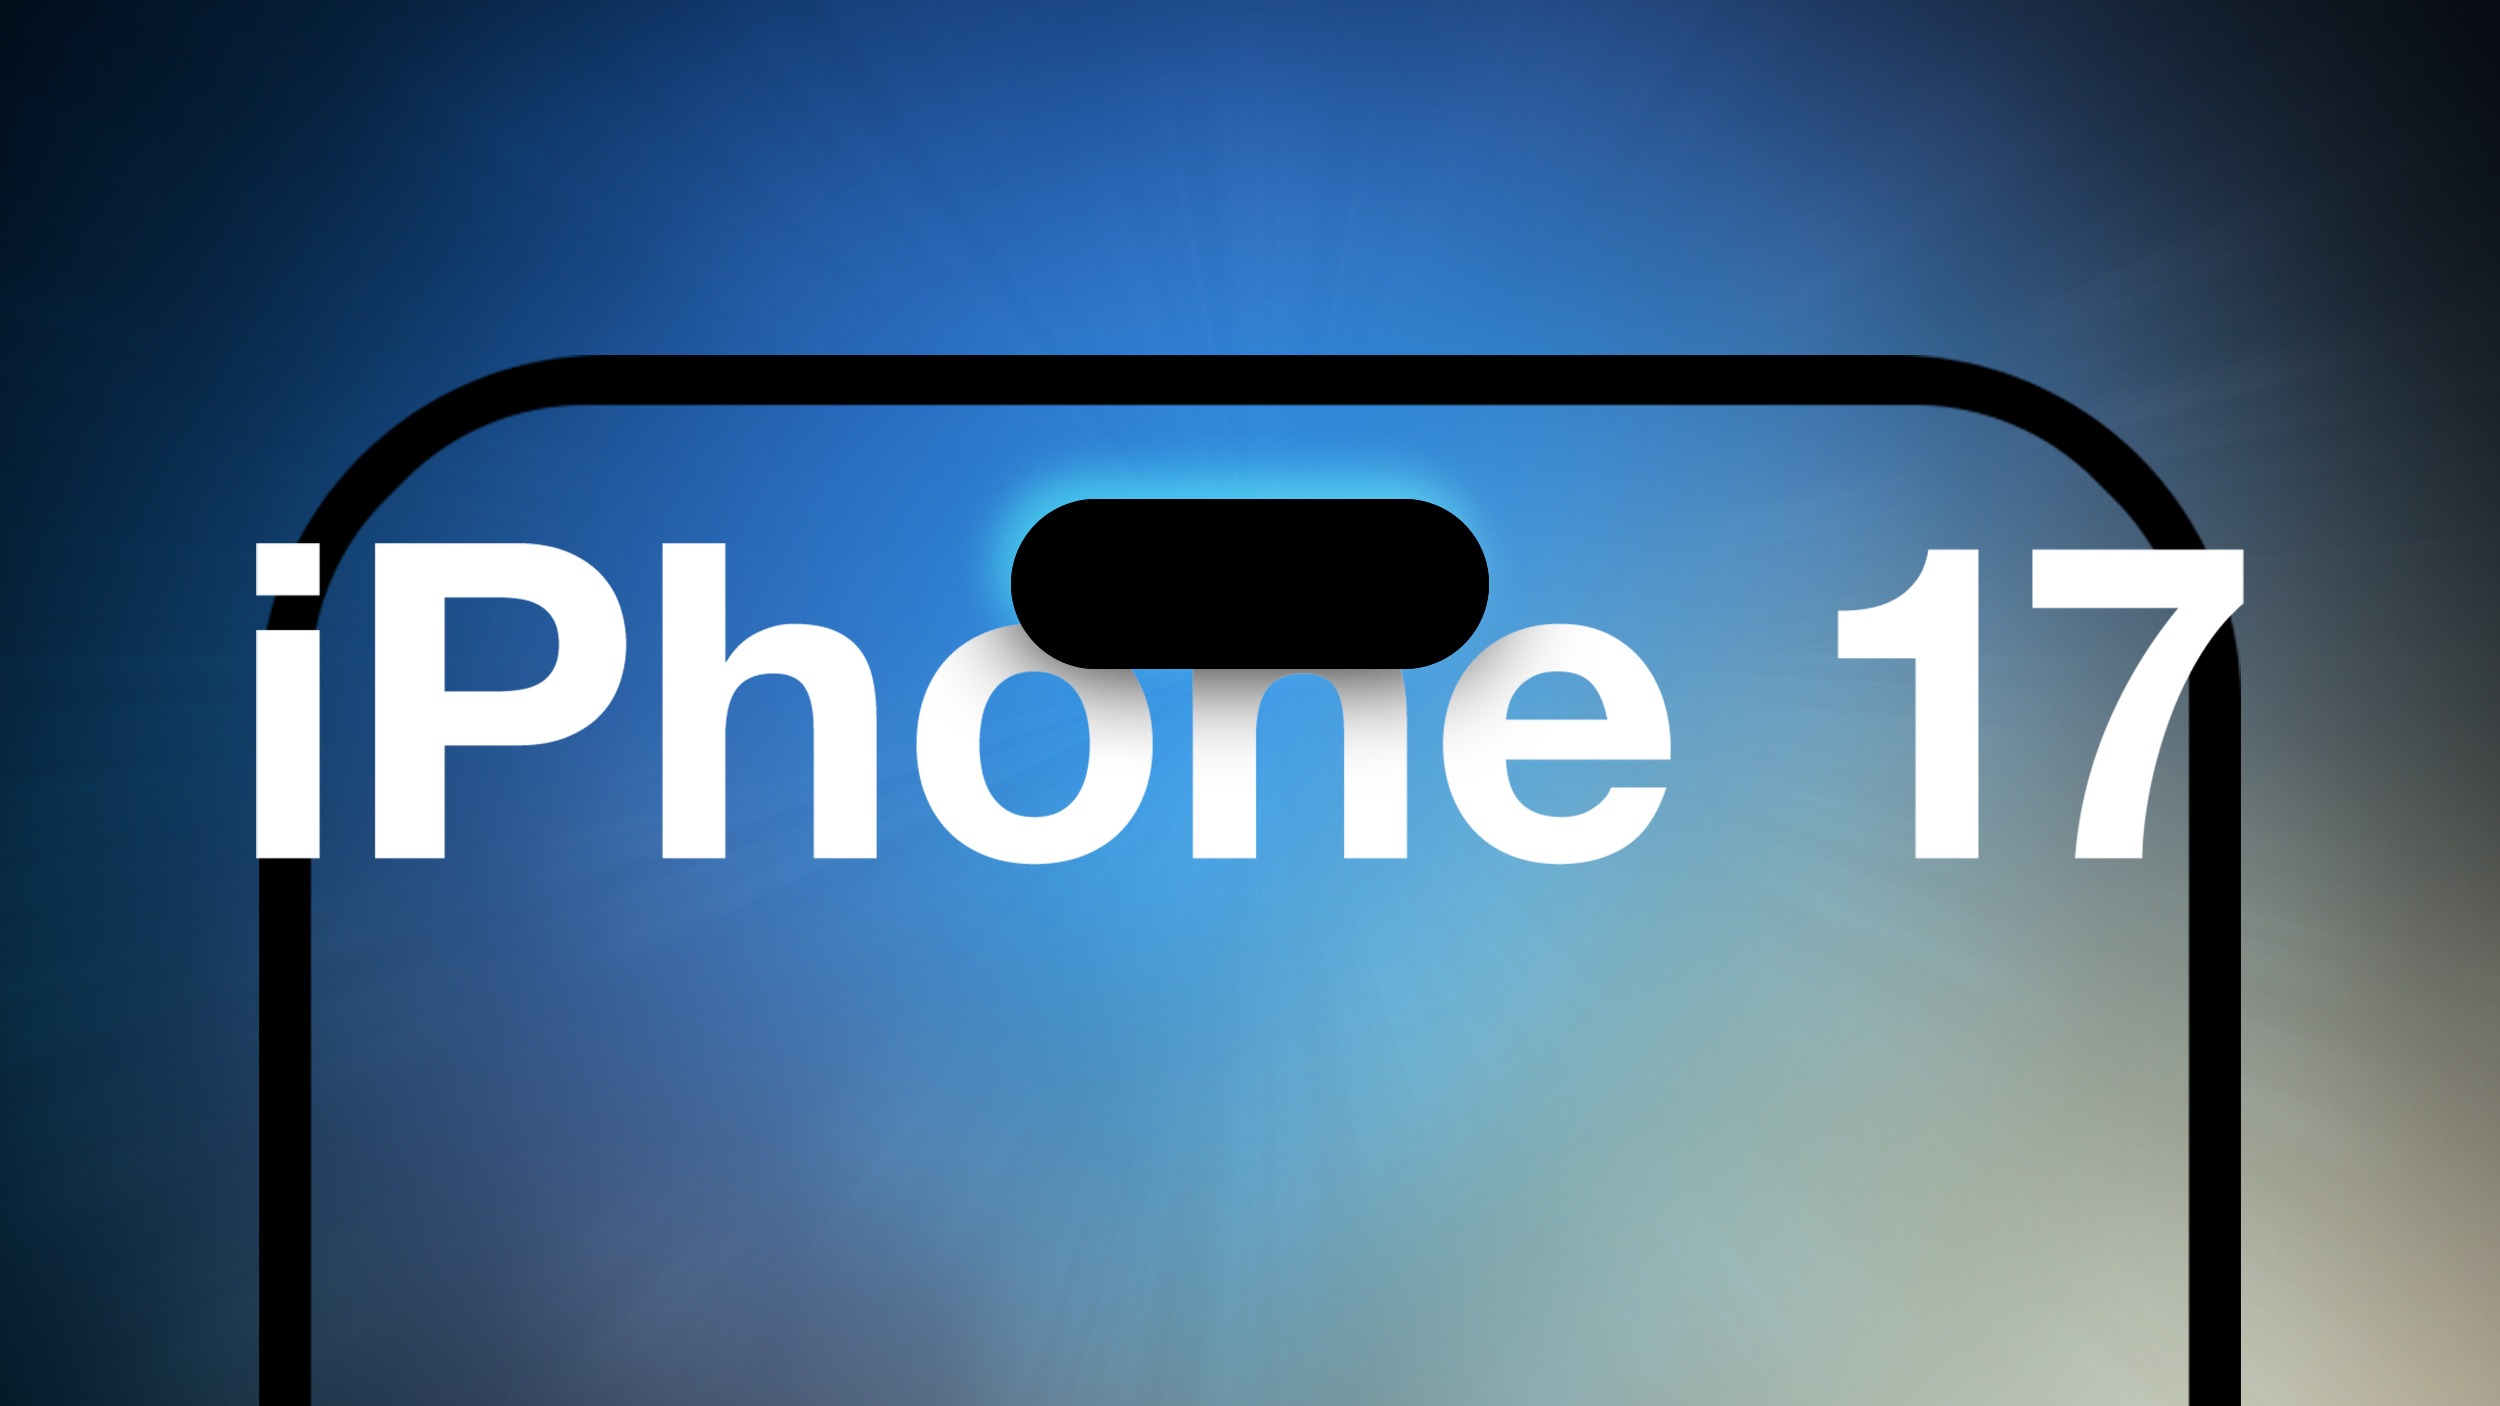 Kuo: Ultra-Thin iPhone 17 to Feature A19 Chip, Single Rear Camera, Semi-Titanium Frame, and More